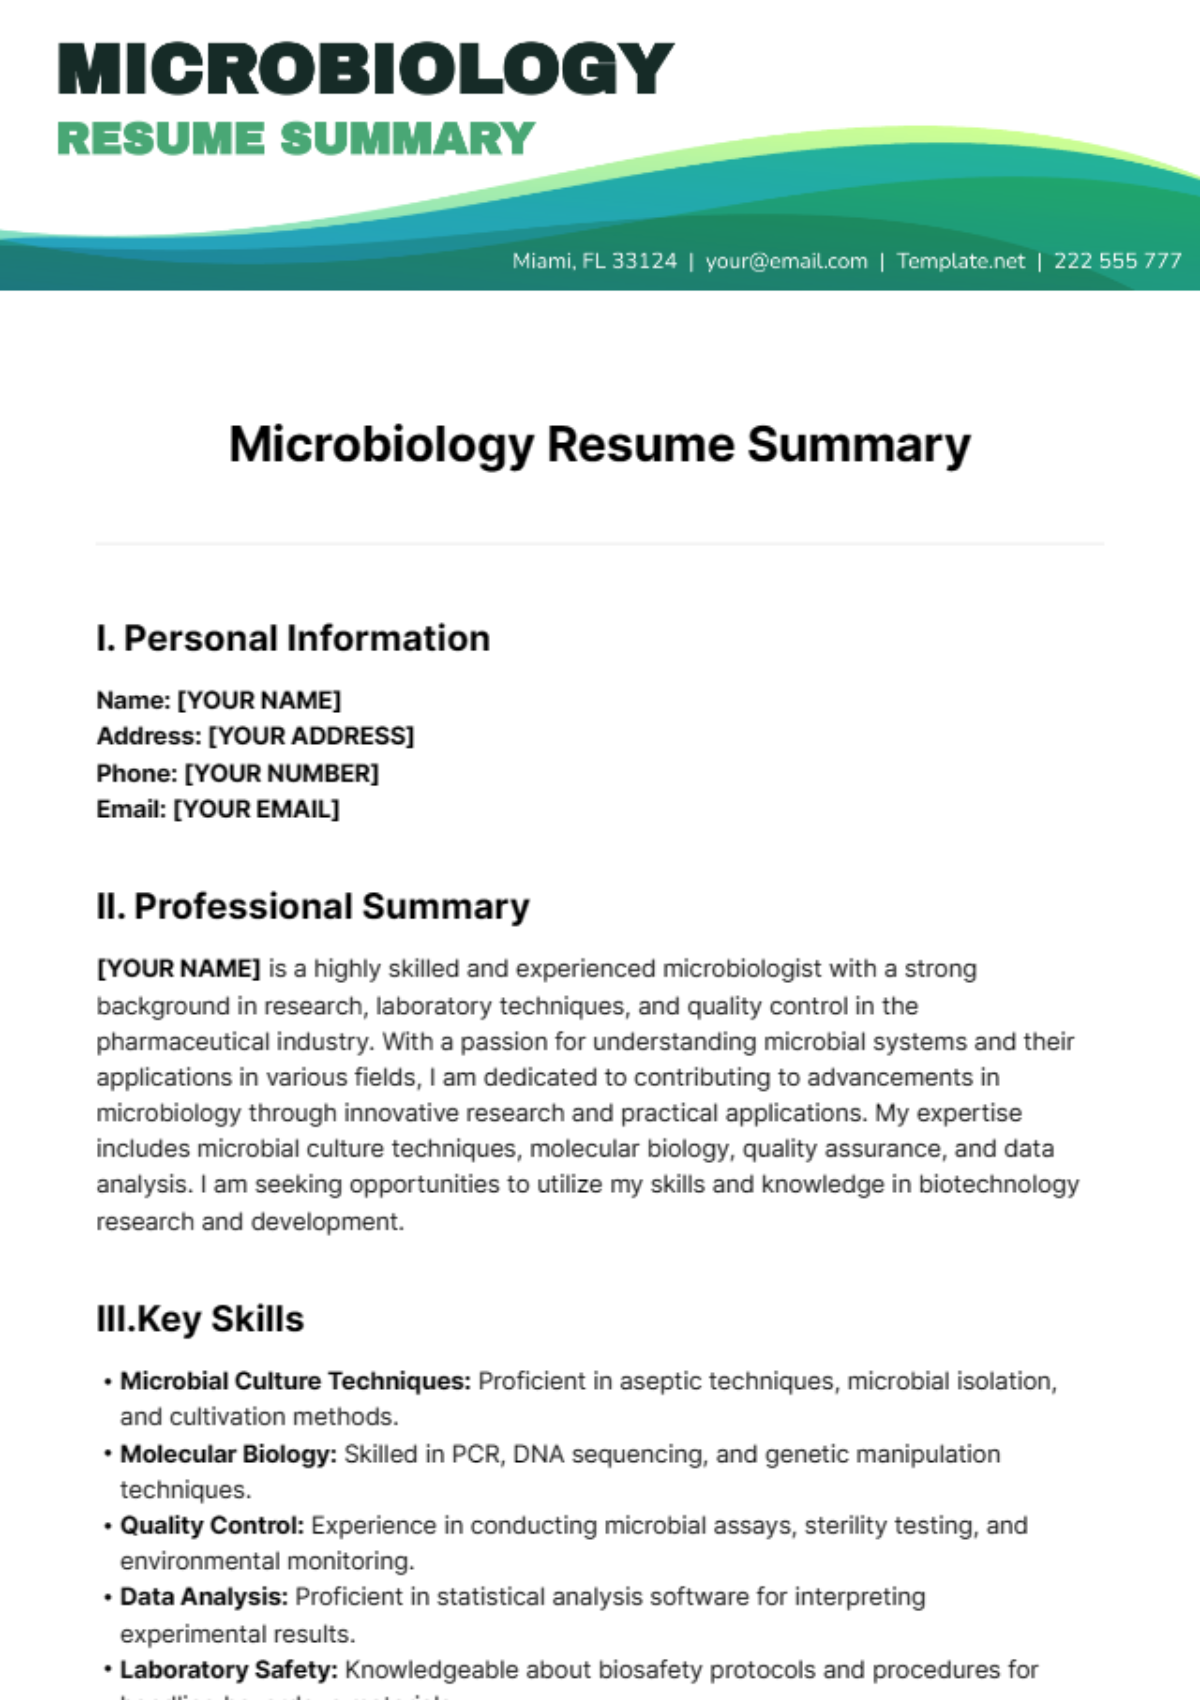 Free Microbiology Resume Summary Template